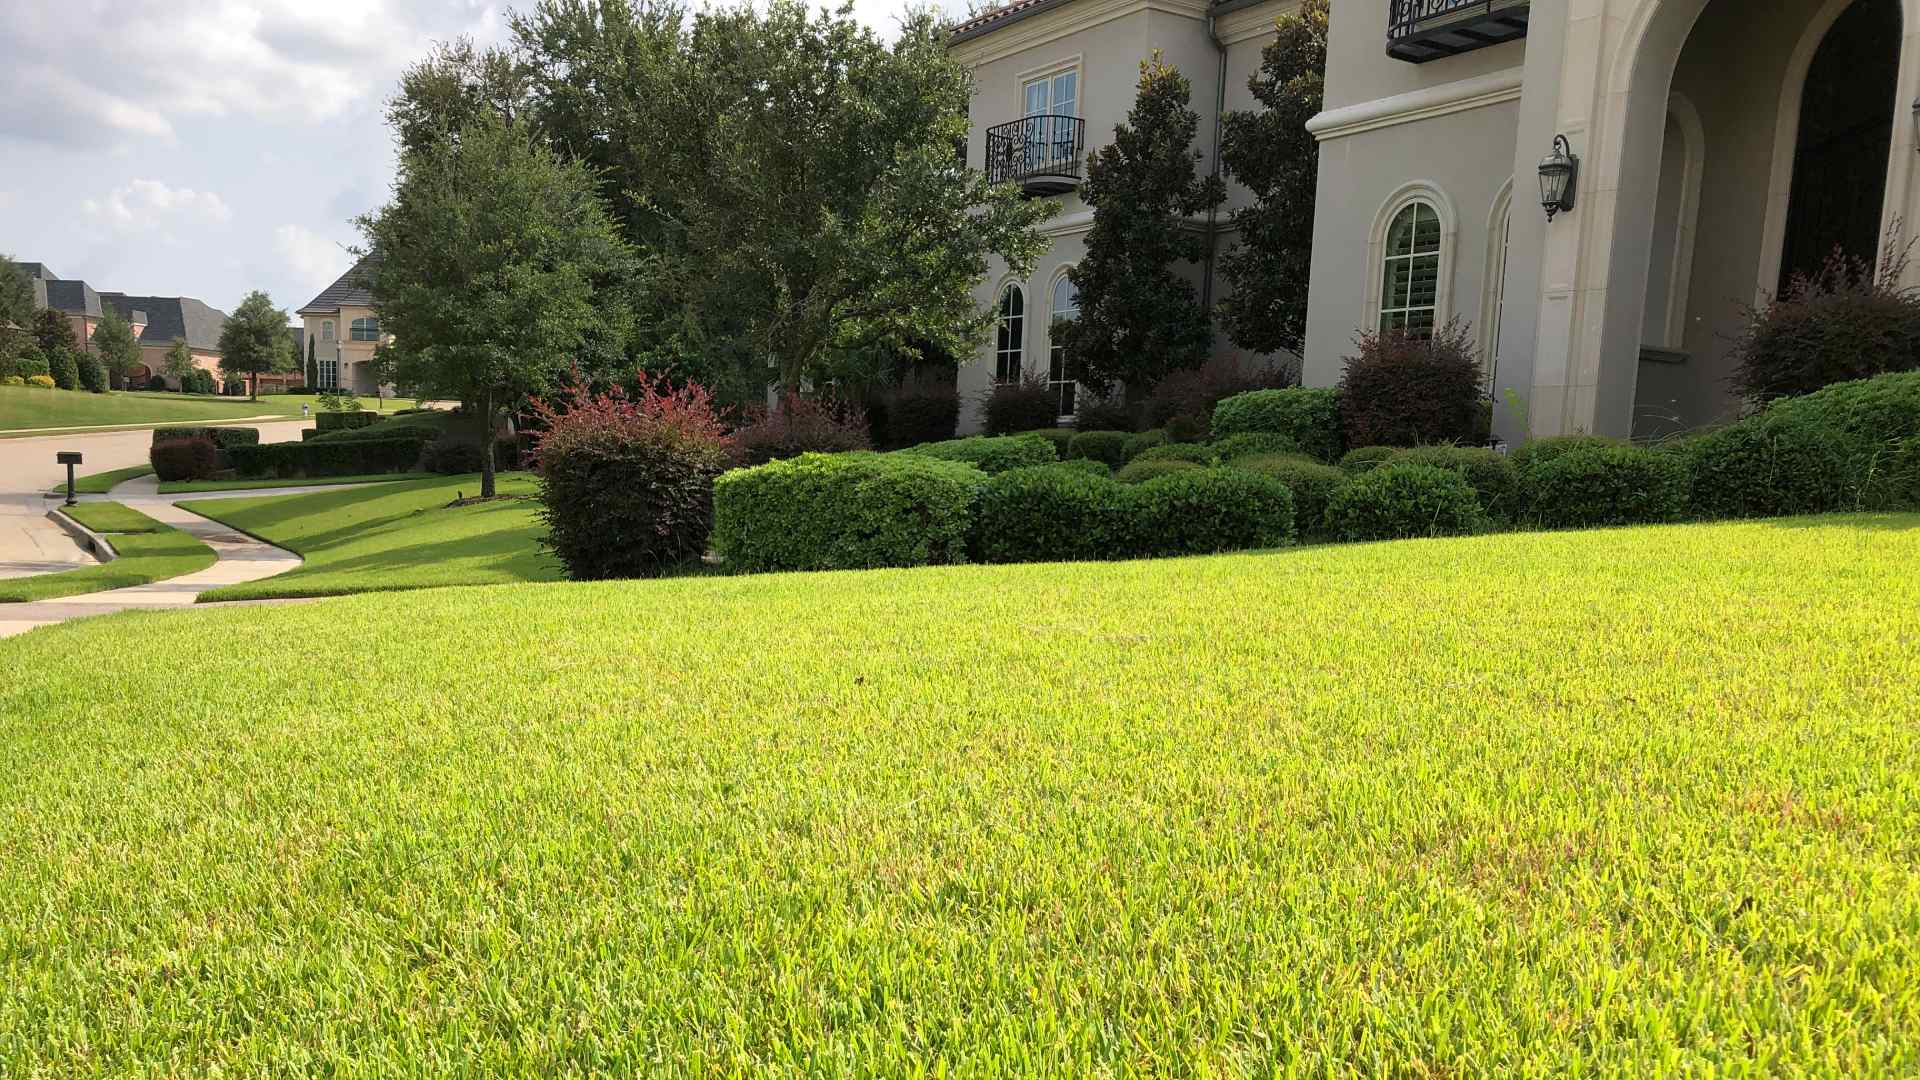 Healthy lawn after serviced by Cititurf professionals in Sachse, TX.